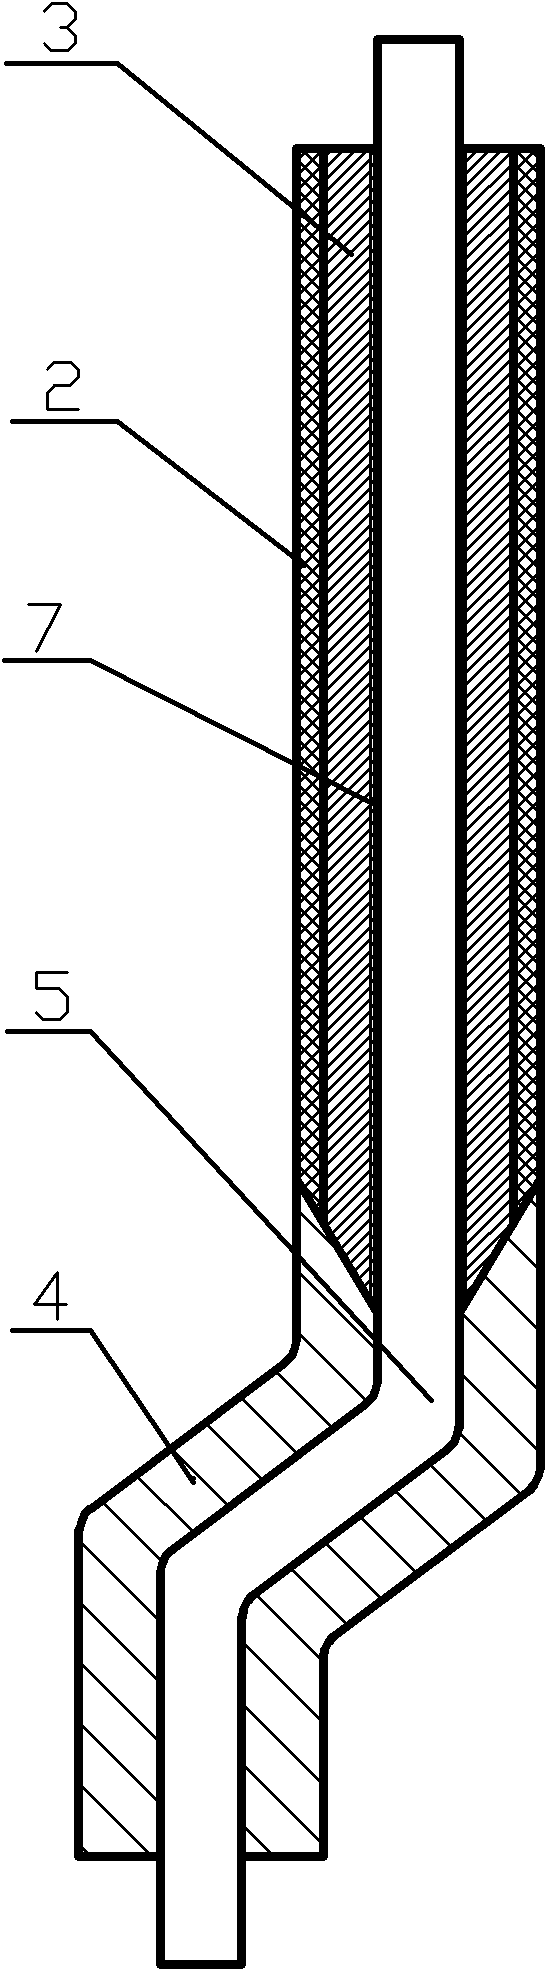 Insulating structure for rotor coil for high-voltage wound rotor motor